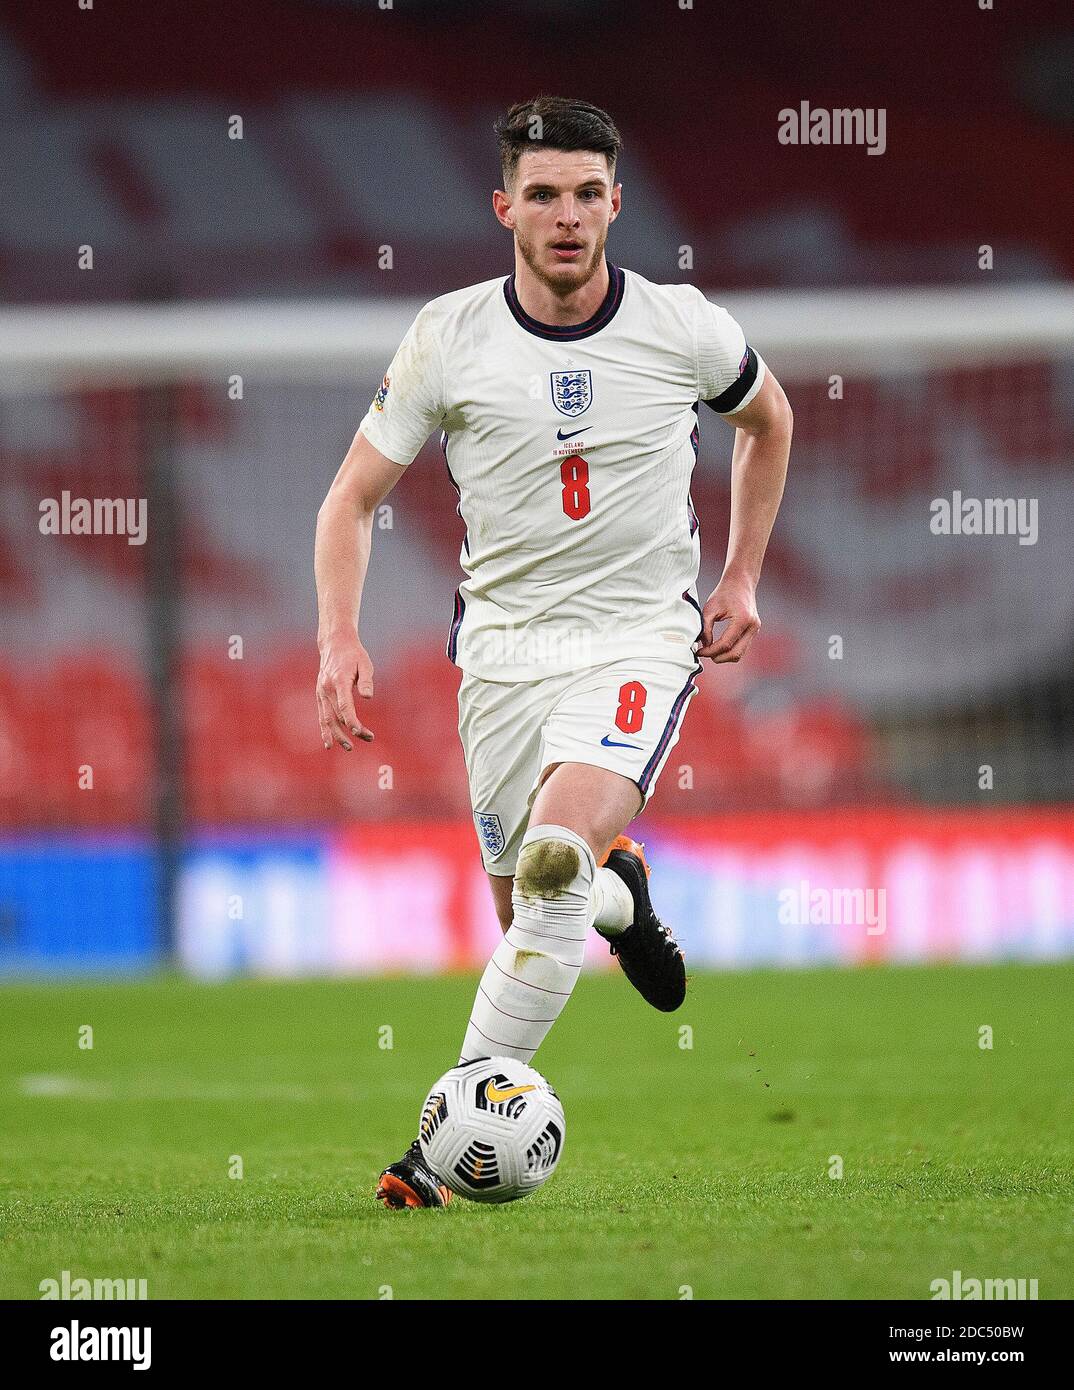 Wembley Stadium, London, 18th Nov 2020.   Engand’s Declan Rice  England v Iceland - UEFA Nations League - Group A2 - Wembley Picture Credit : © Mark Pain / Alamy Live News Stock Photo